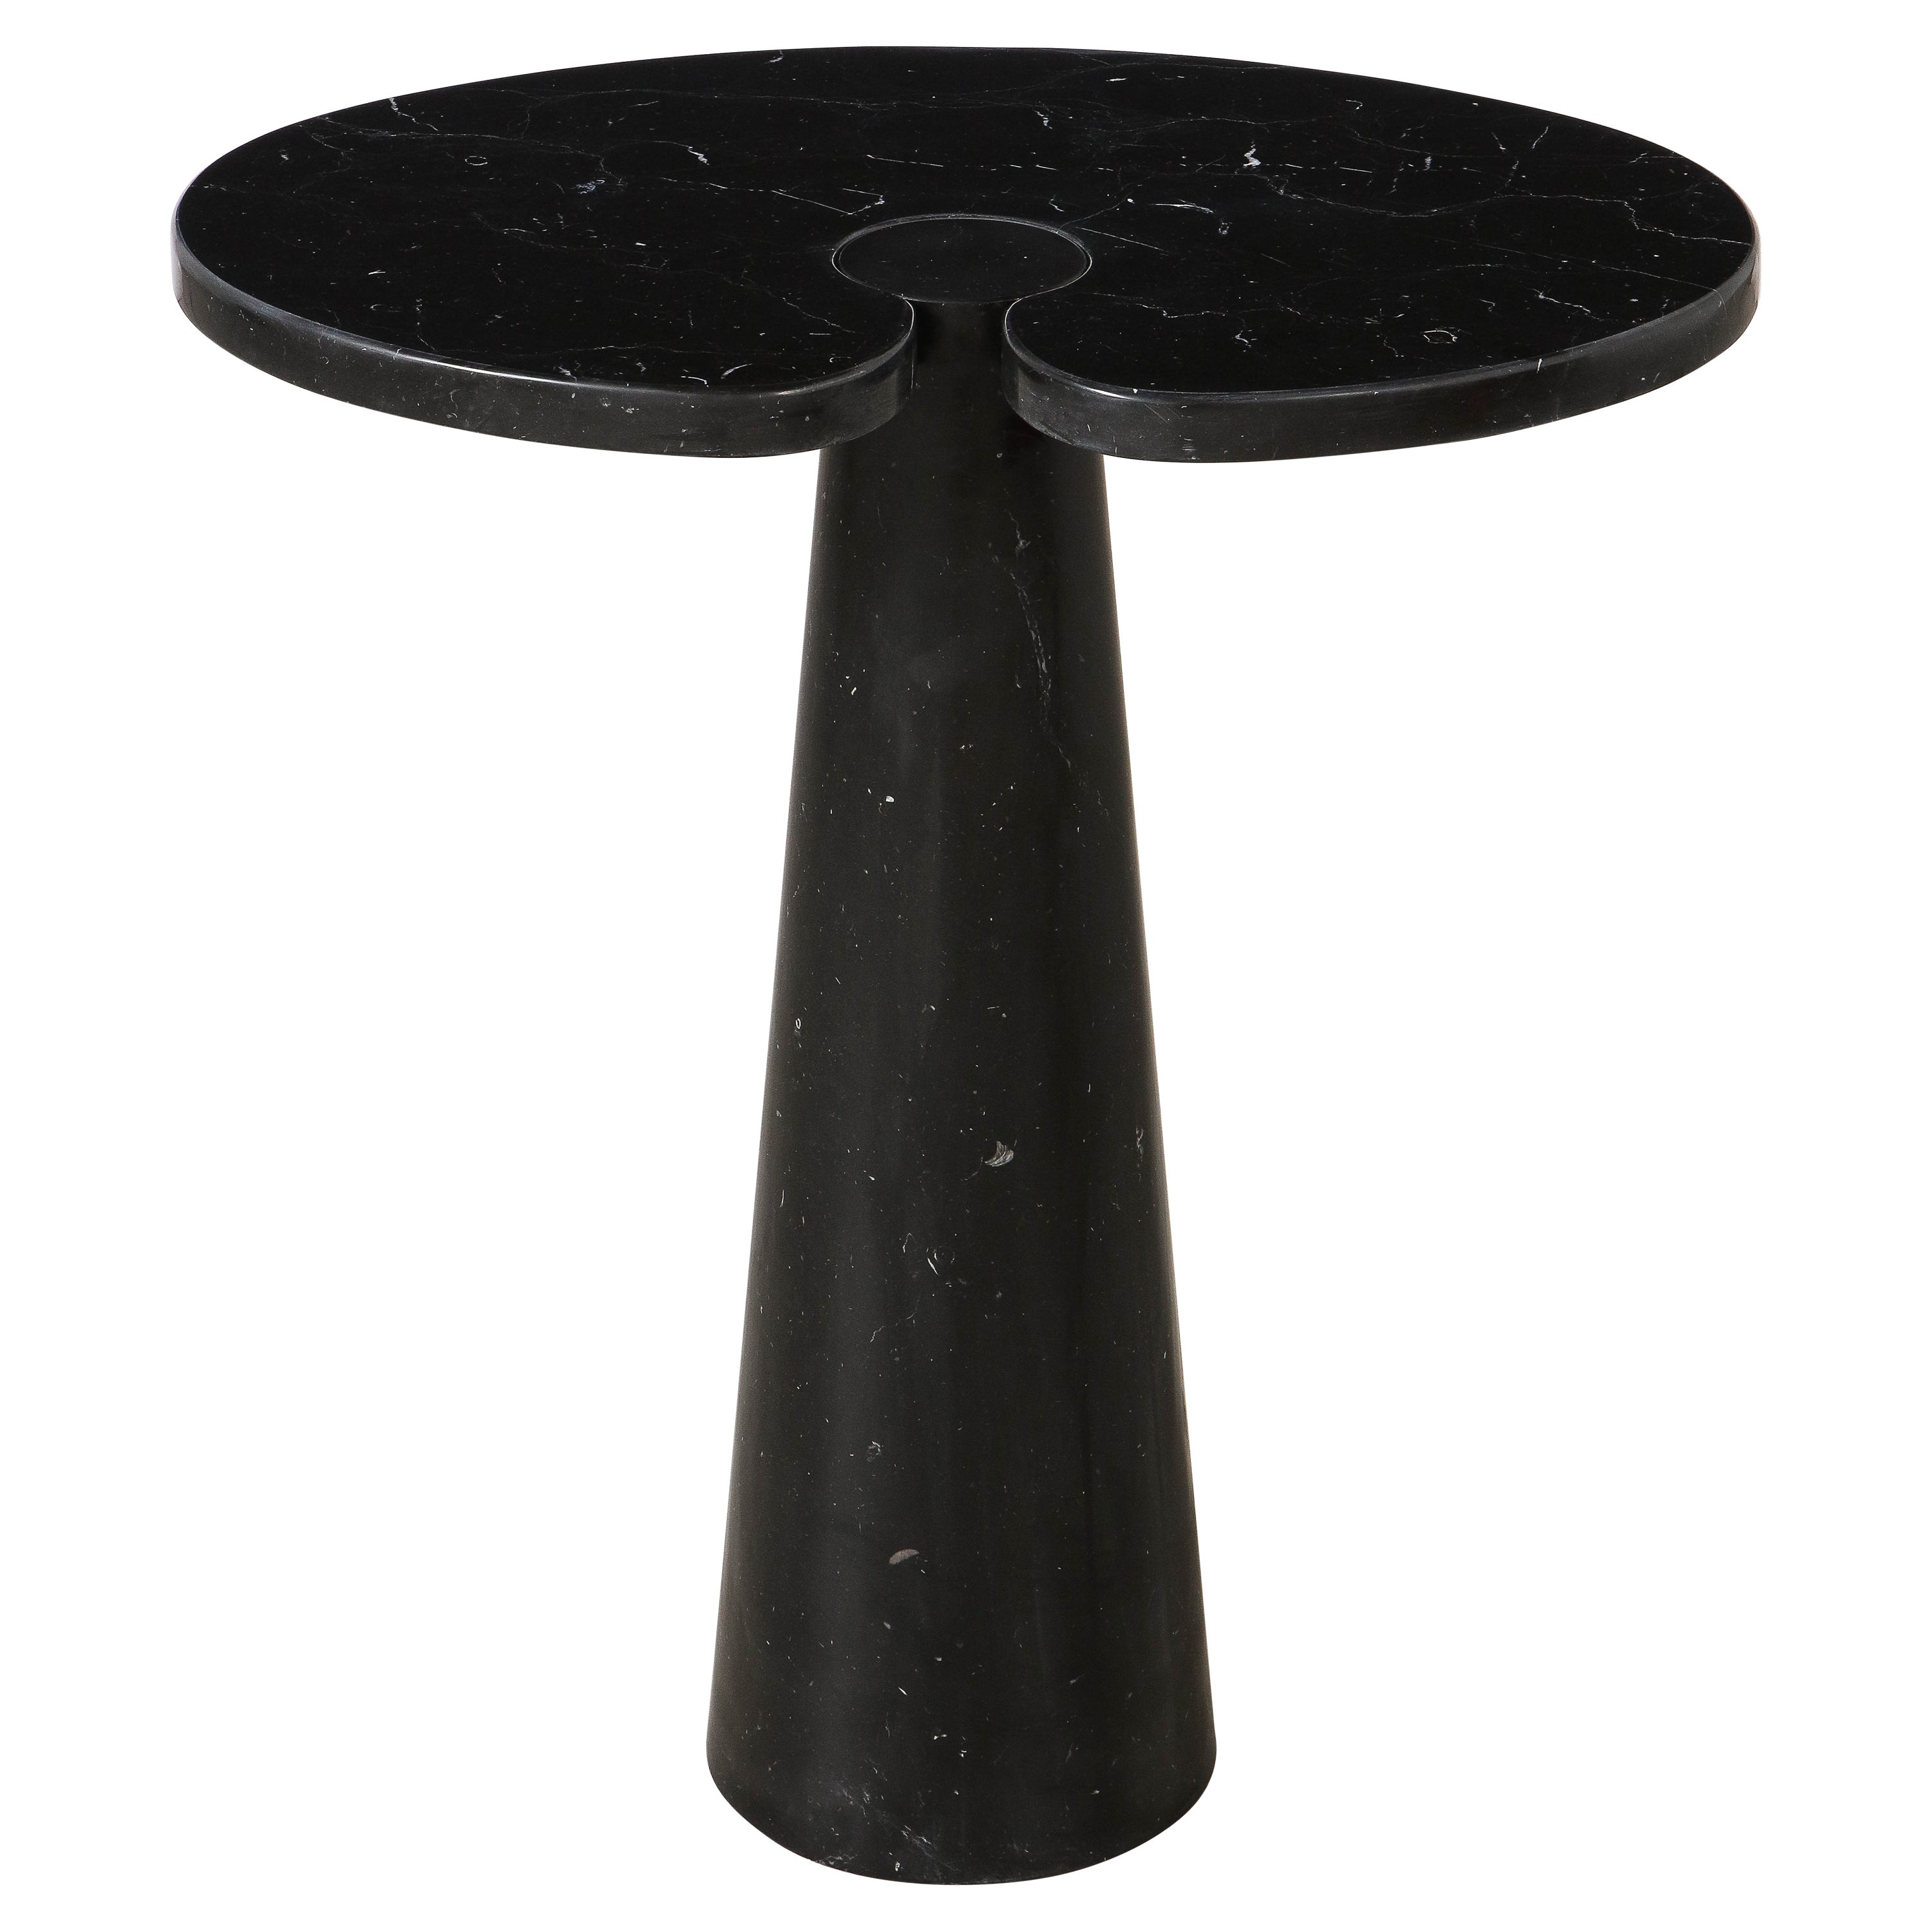 Angelo Mangiarotti for Skipper 'Eros' Nero Marquina Tall Marble Side Table